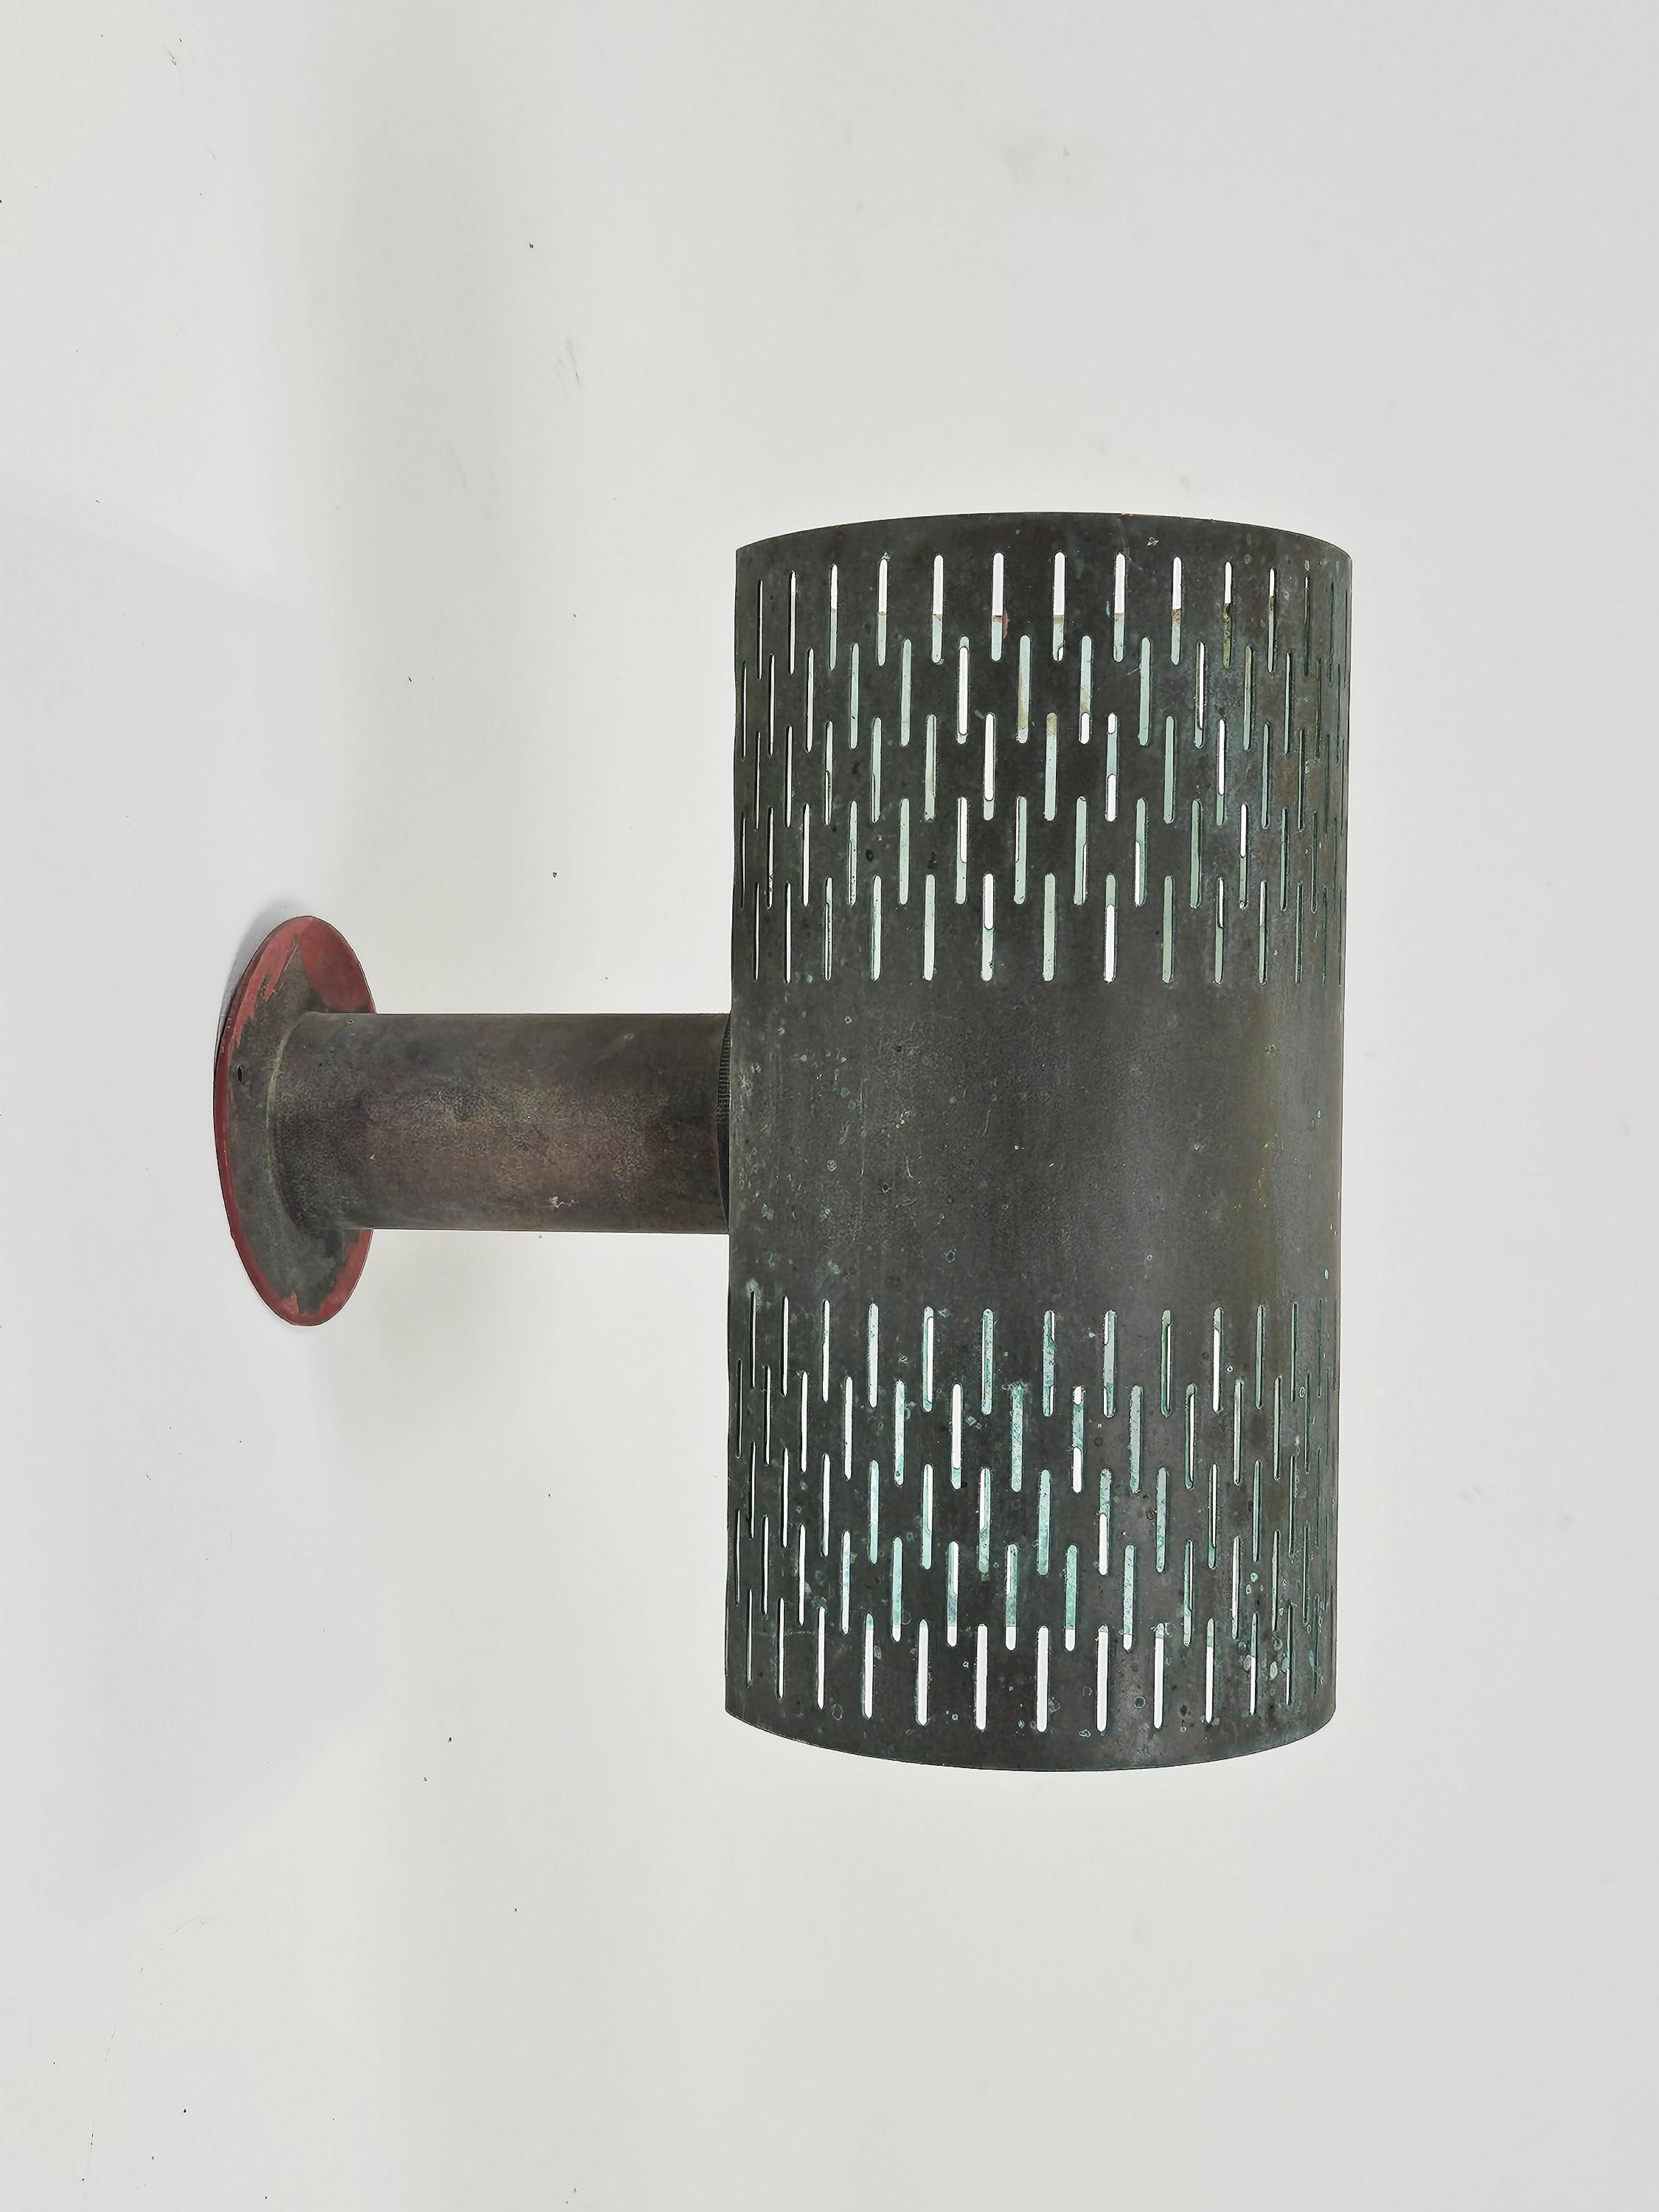 Rare outdoor wall lamps by Hans Bergström for Ateljé Lyktan, Sweden, 1950s.

These high-quality lamps are made of solid copper with a perforated pattern that looks amazing when lit.
